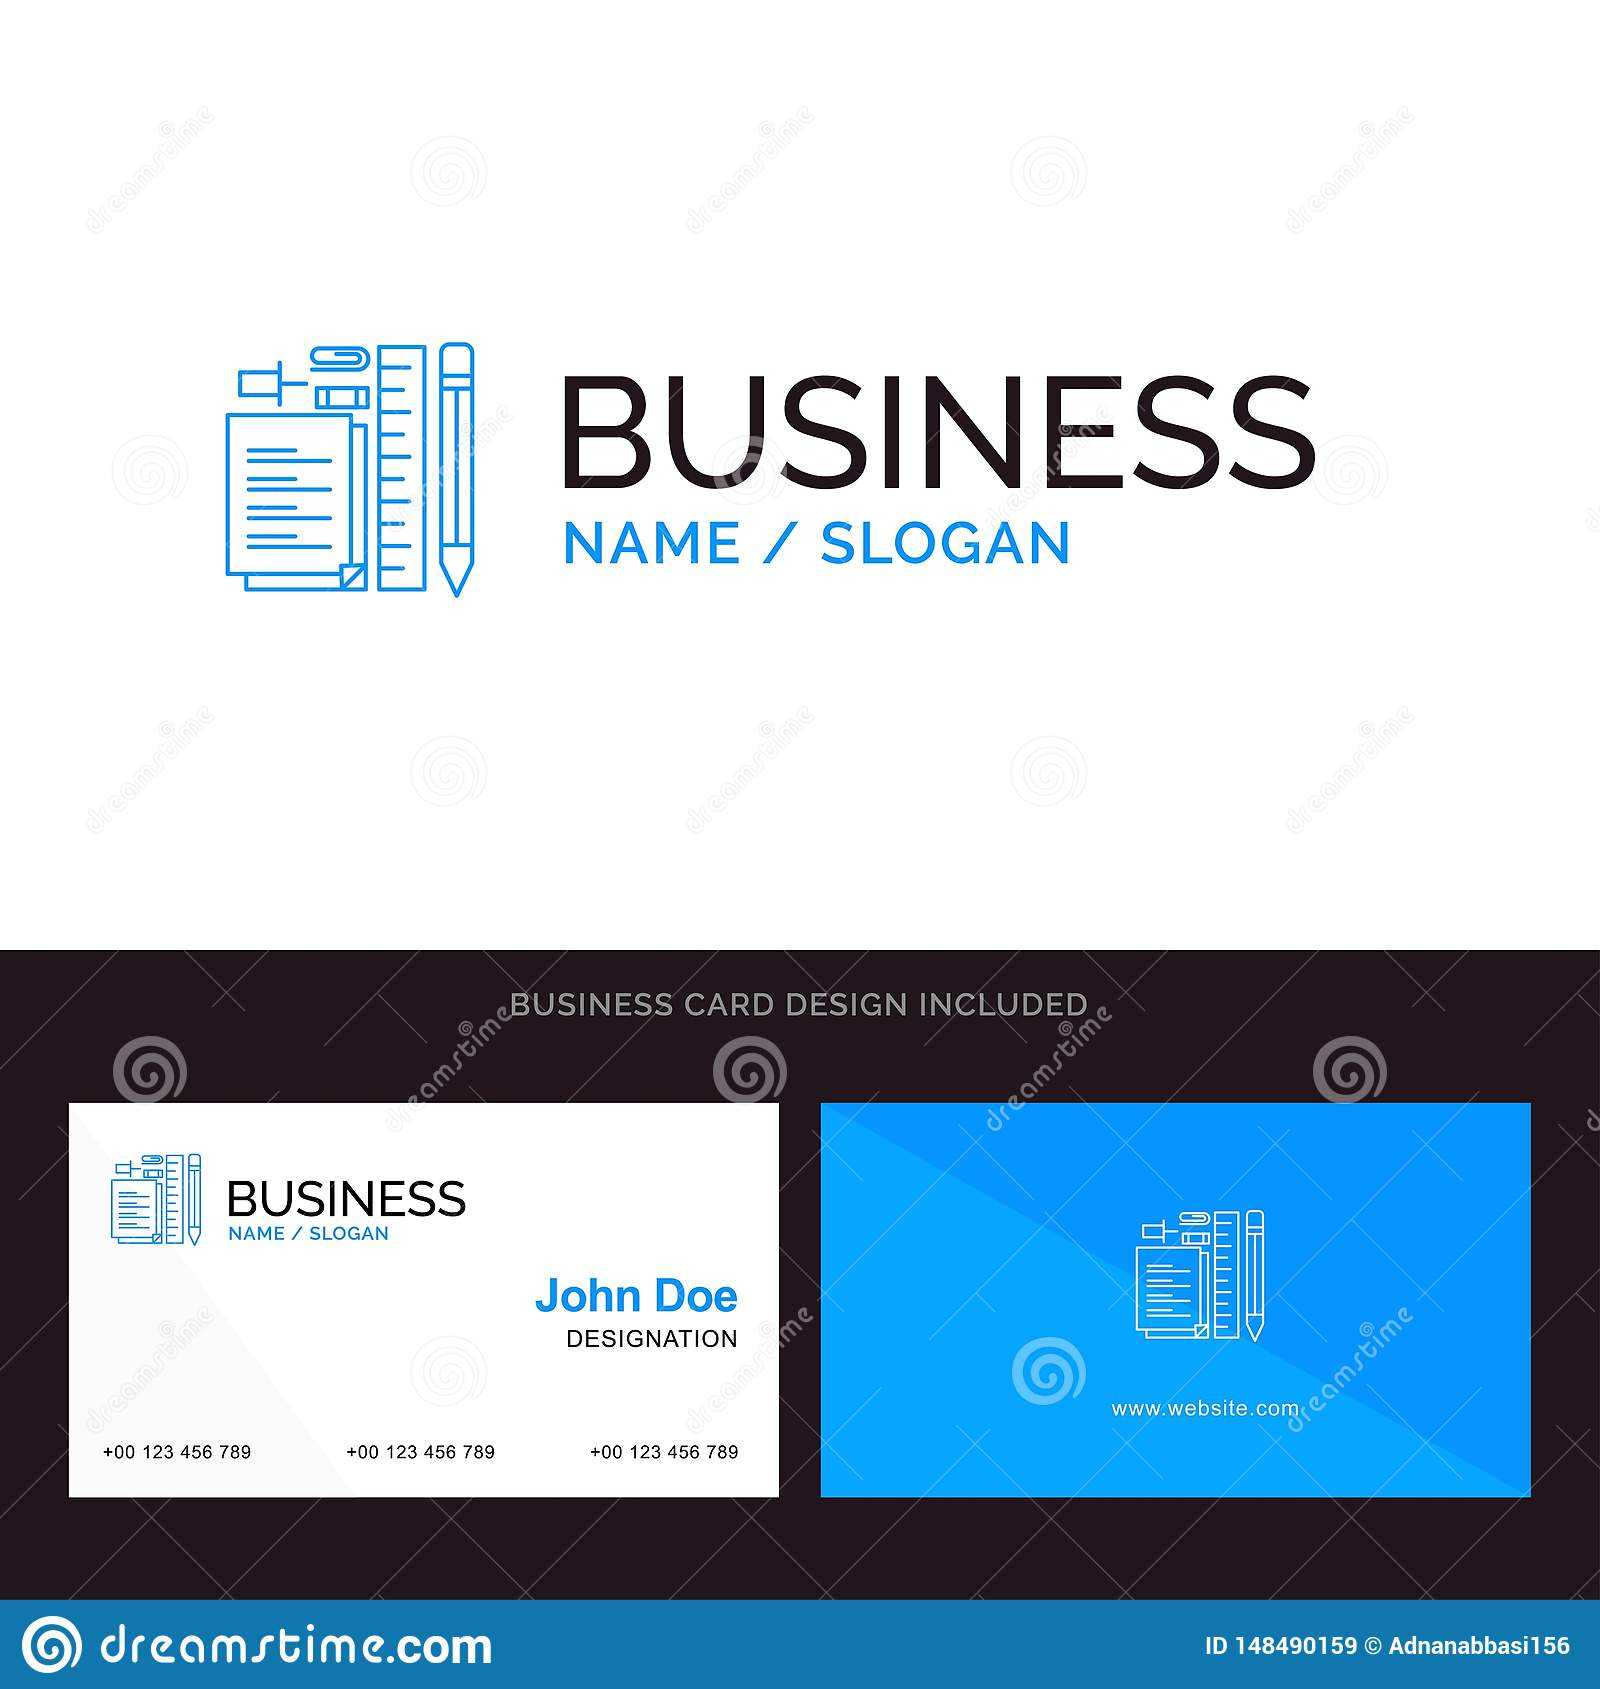 Stationary, Pencil, Pen, Notepad, Pin Blue Business Logo And Inside Push Card Template